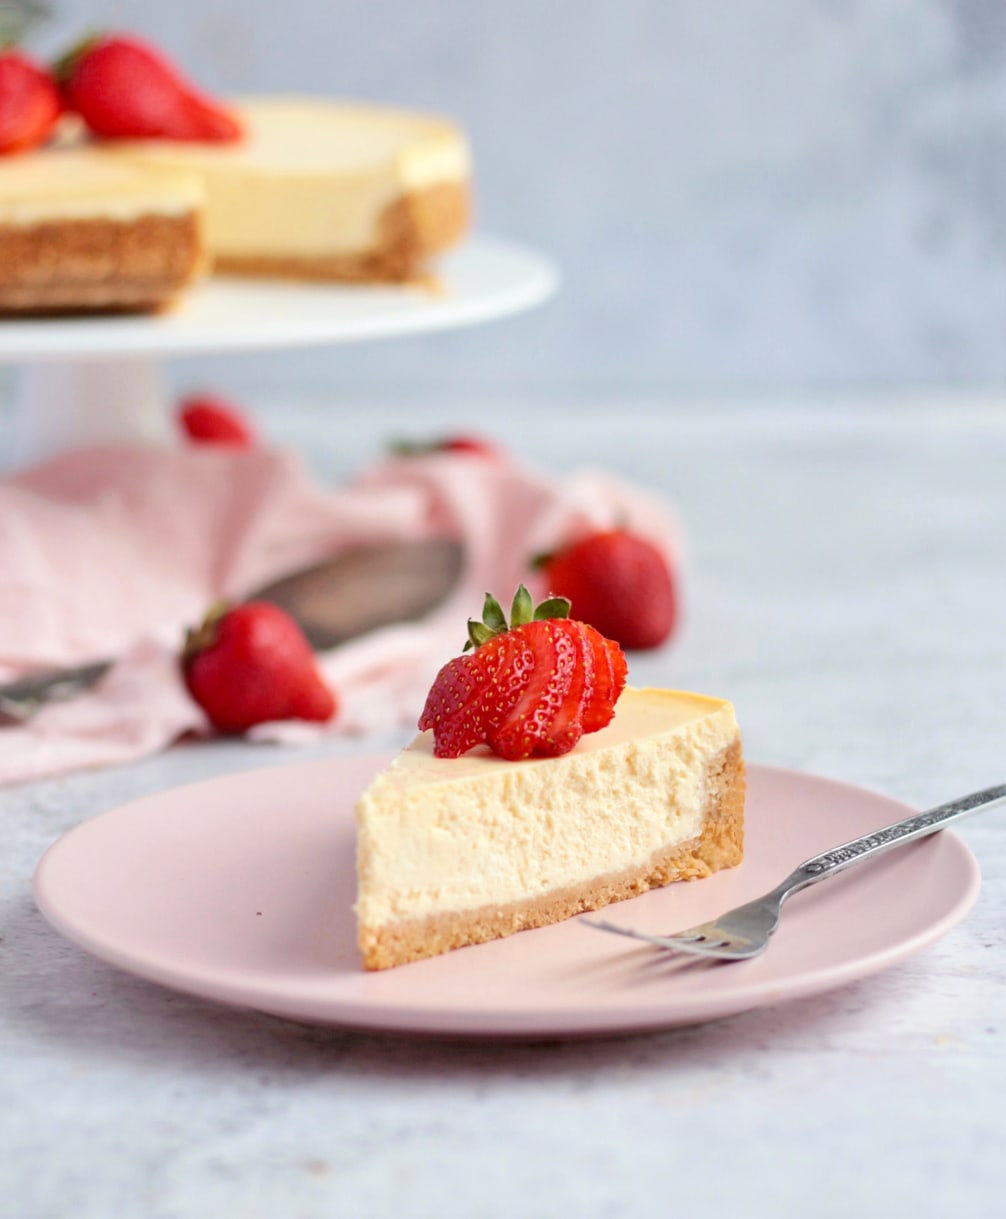 One slice of cheesecake topped with fresh strawberries on a pink plate